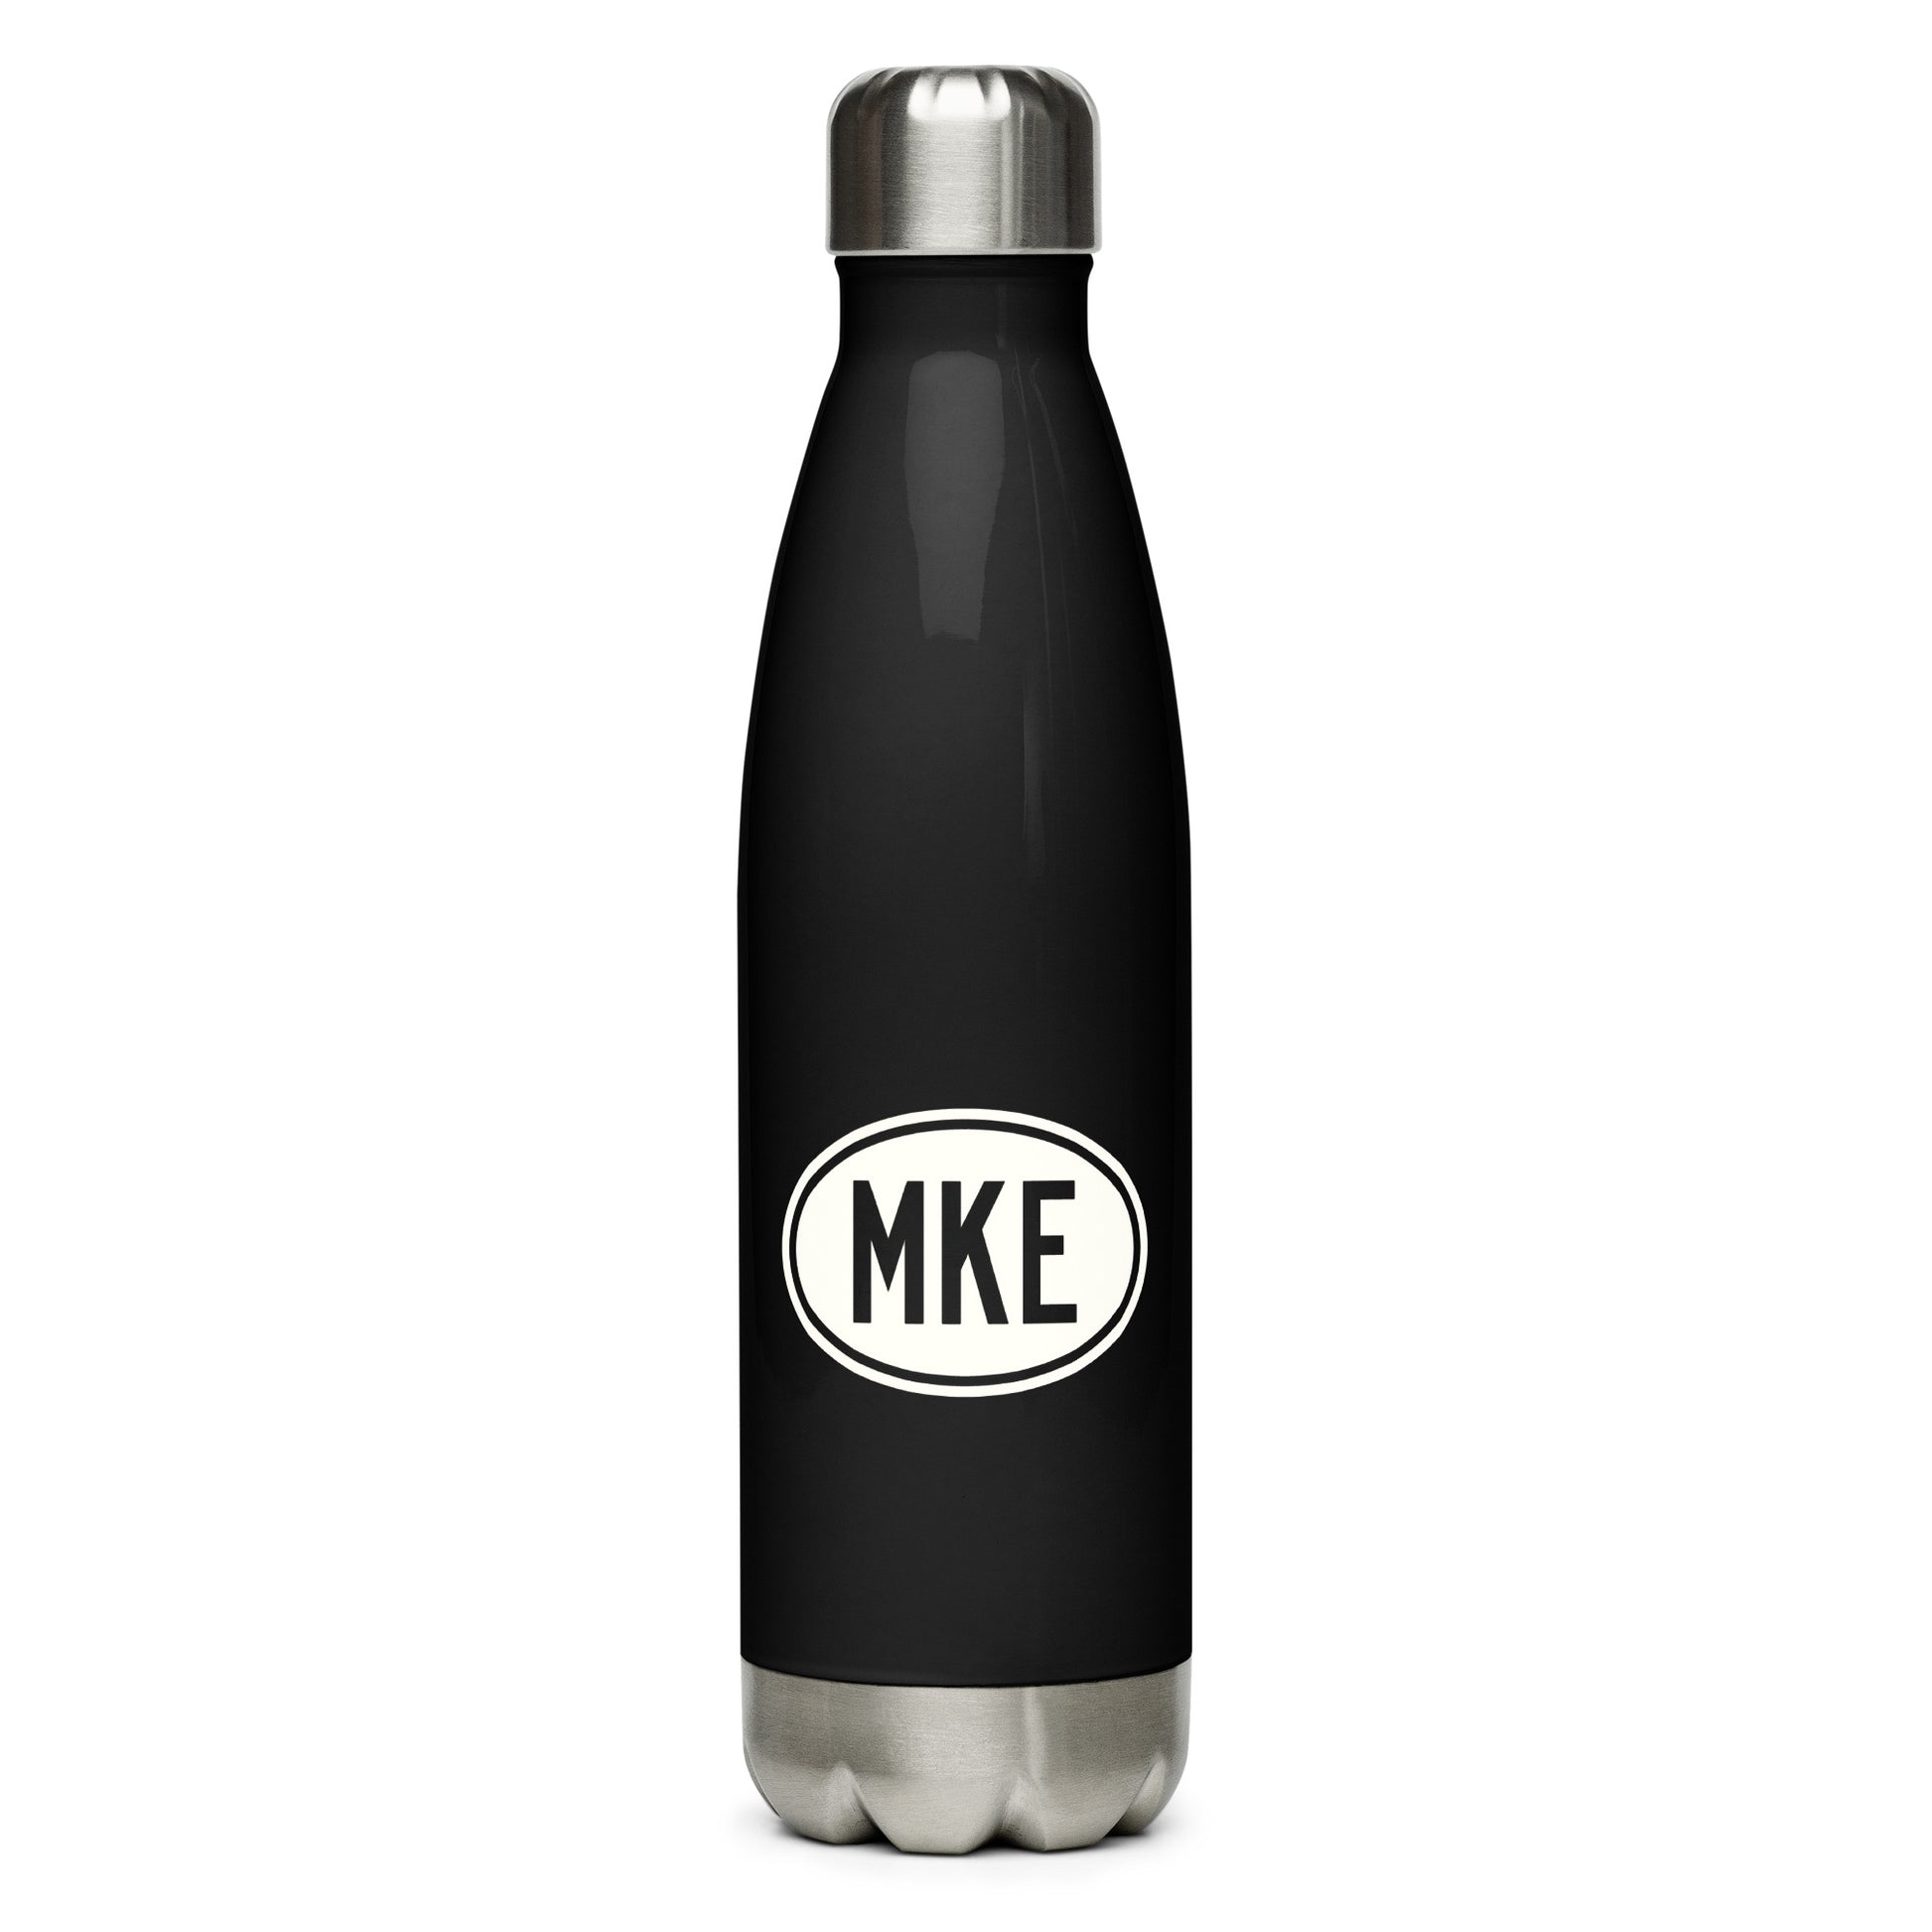 Unique Travel Gift Water Bottle - White Oval • MKE Milwaukee • YHM Designs - Image 01